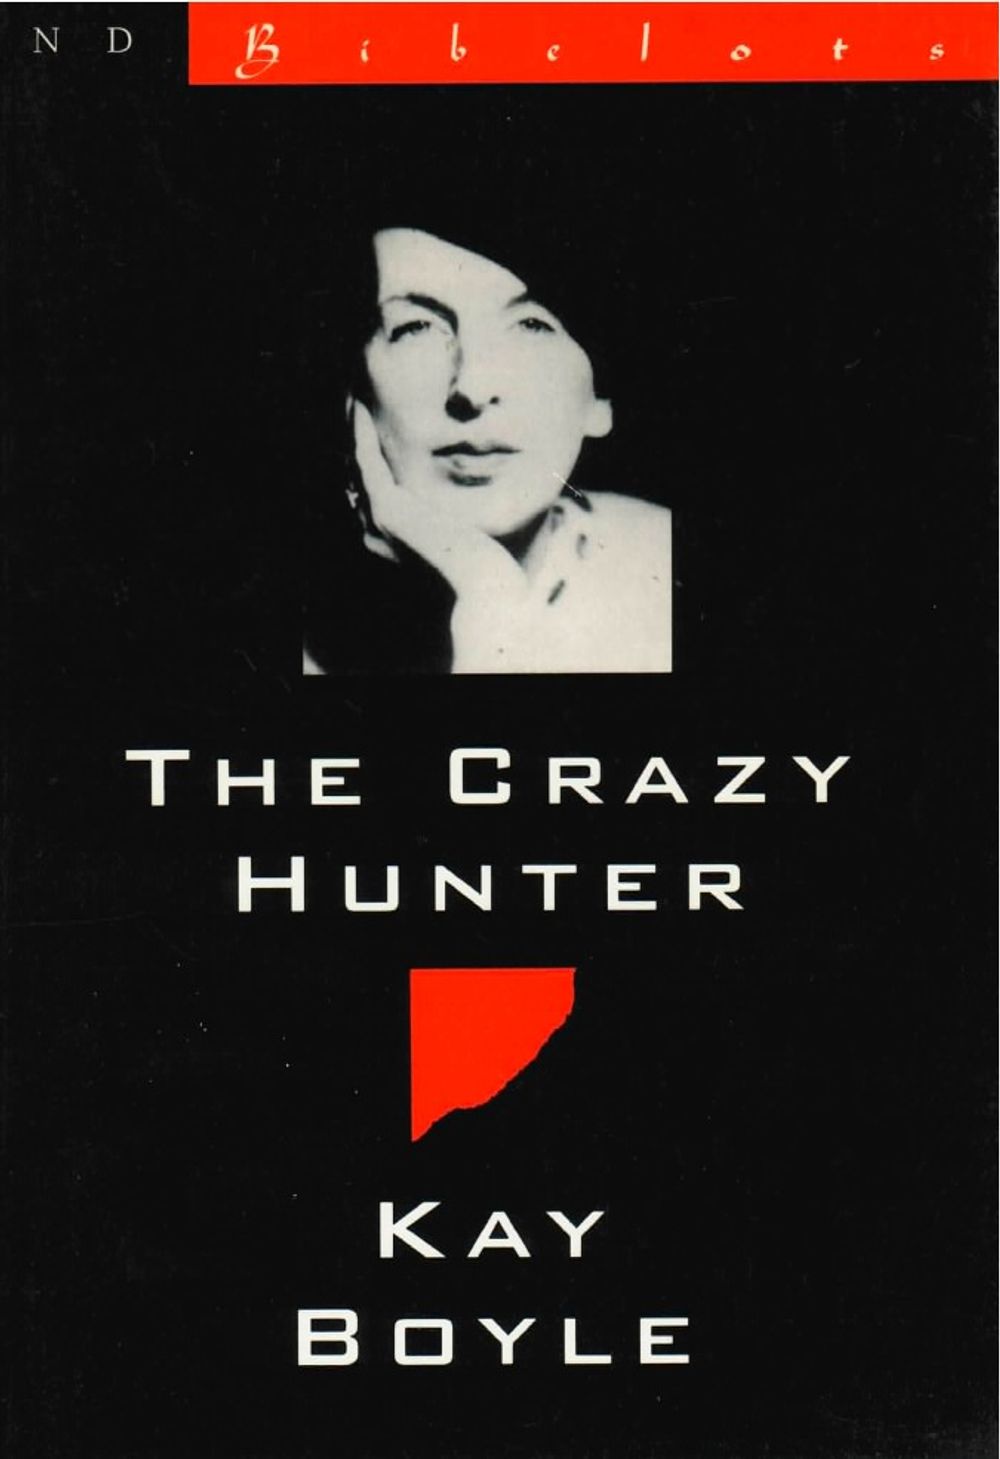 The Crazy Hunter  New Directions Publishing